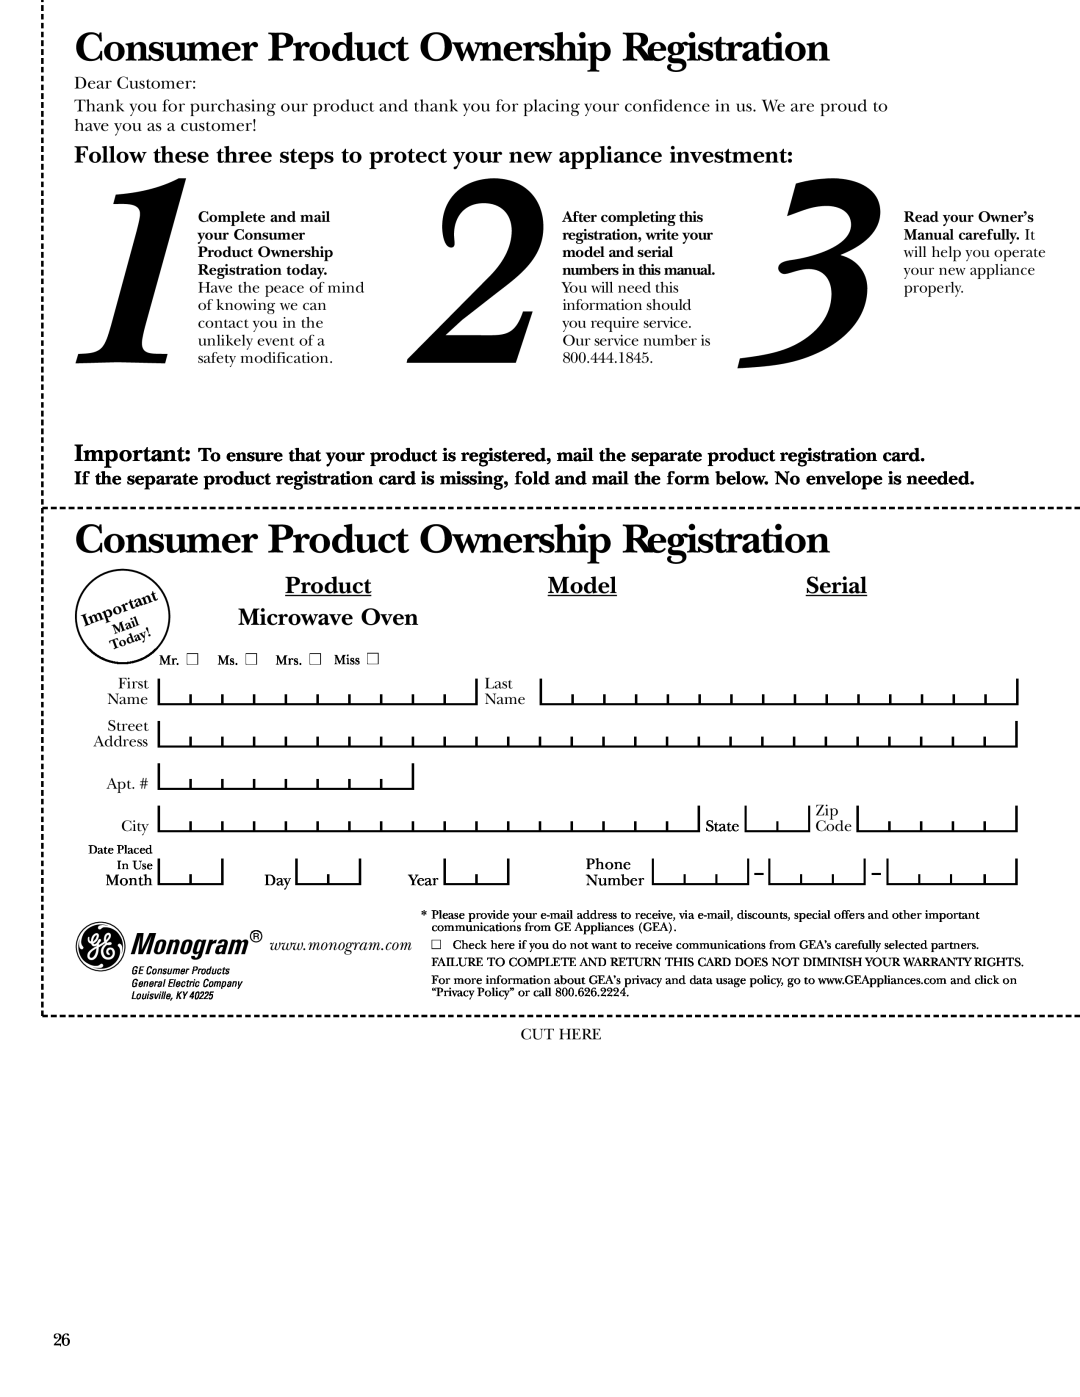 GE ZE2160 Consumer Product Ownership Registration, Follow these three steps to protect your new appliance investment 